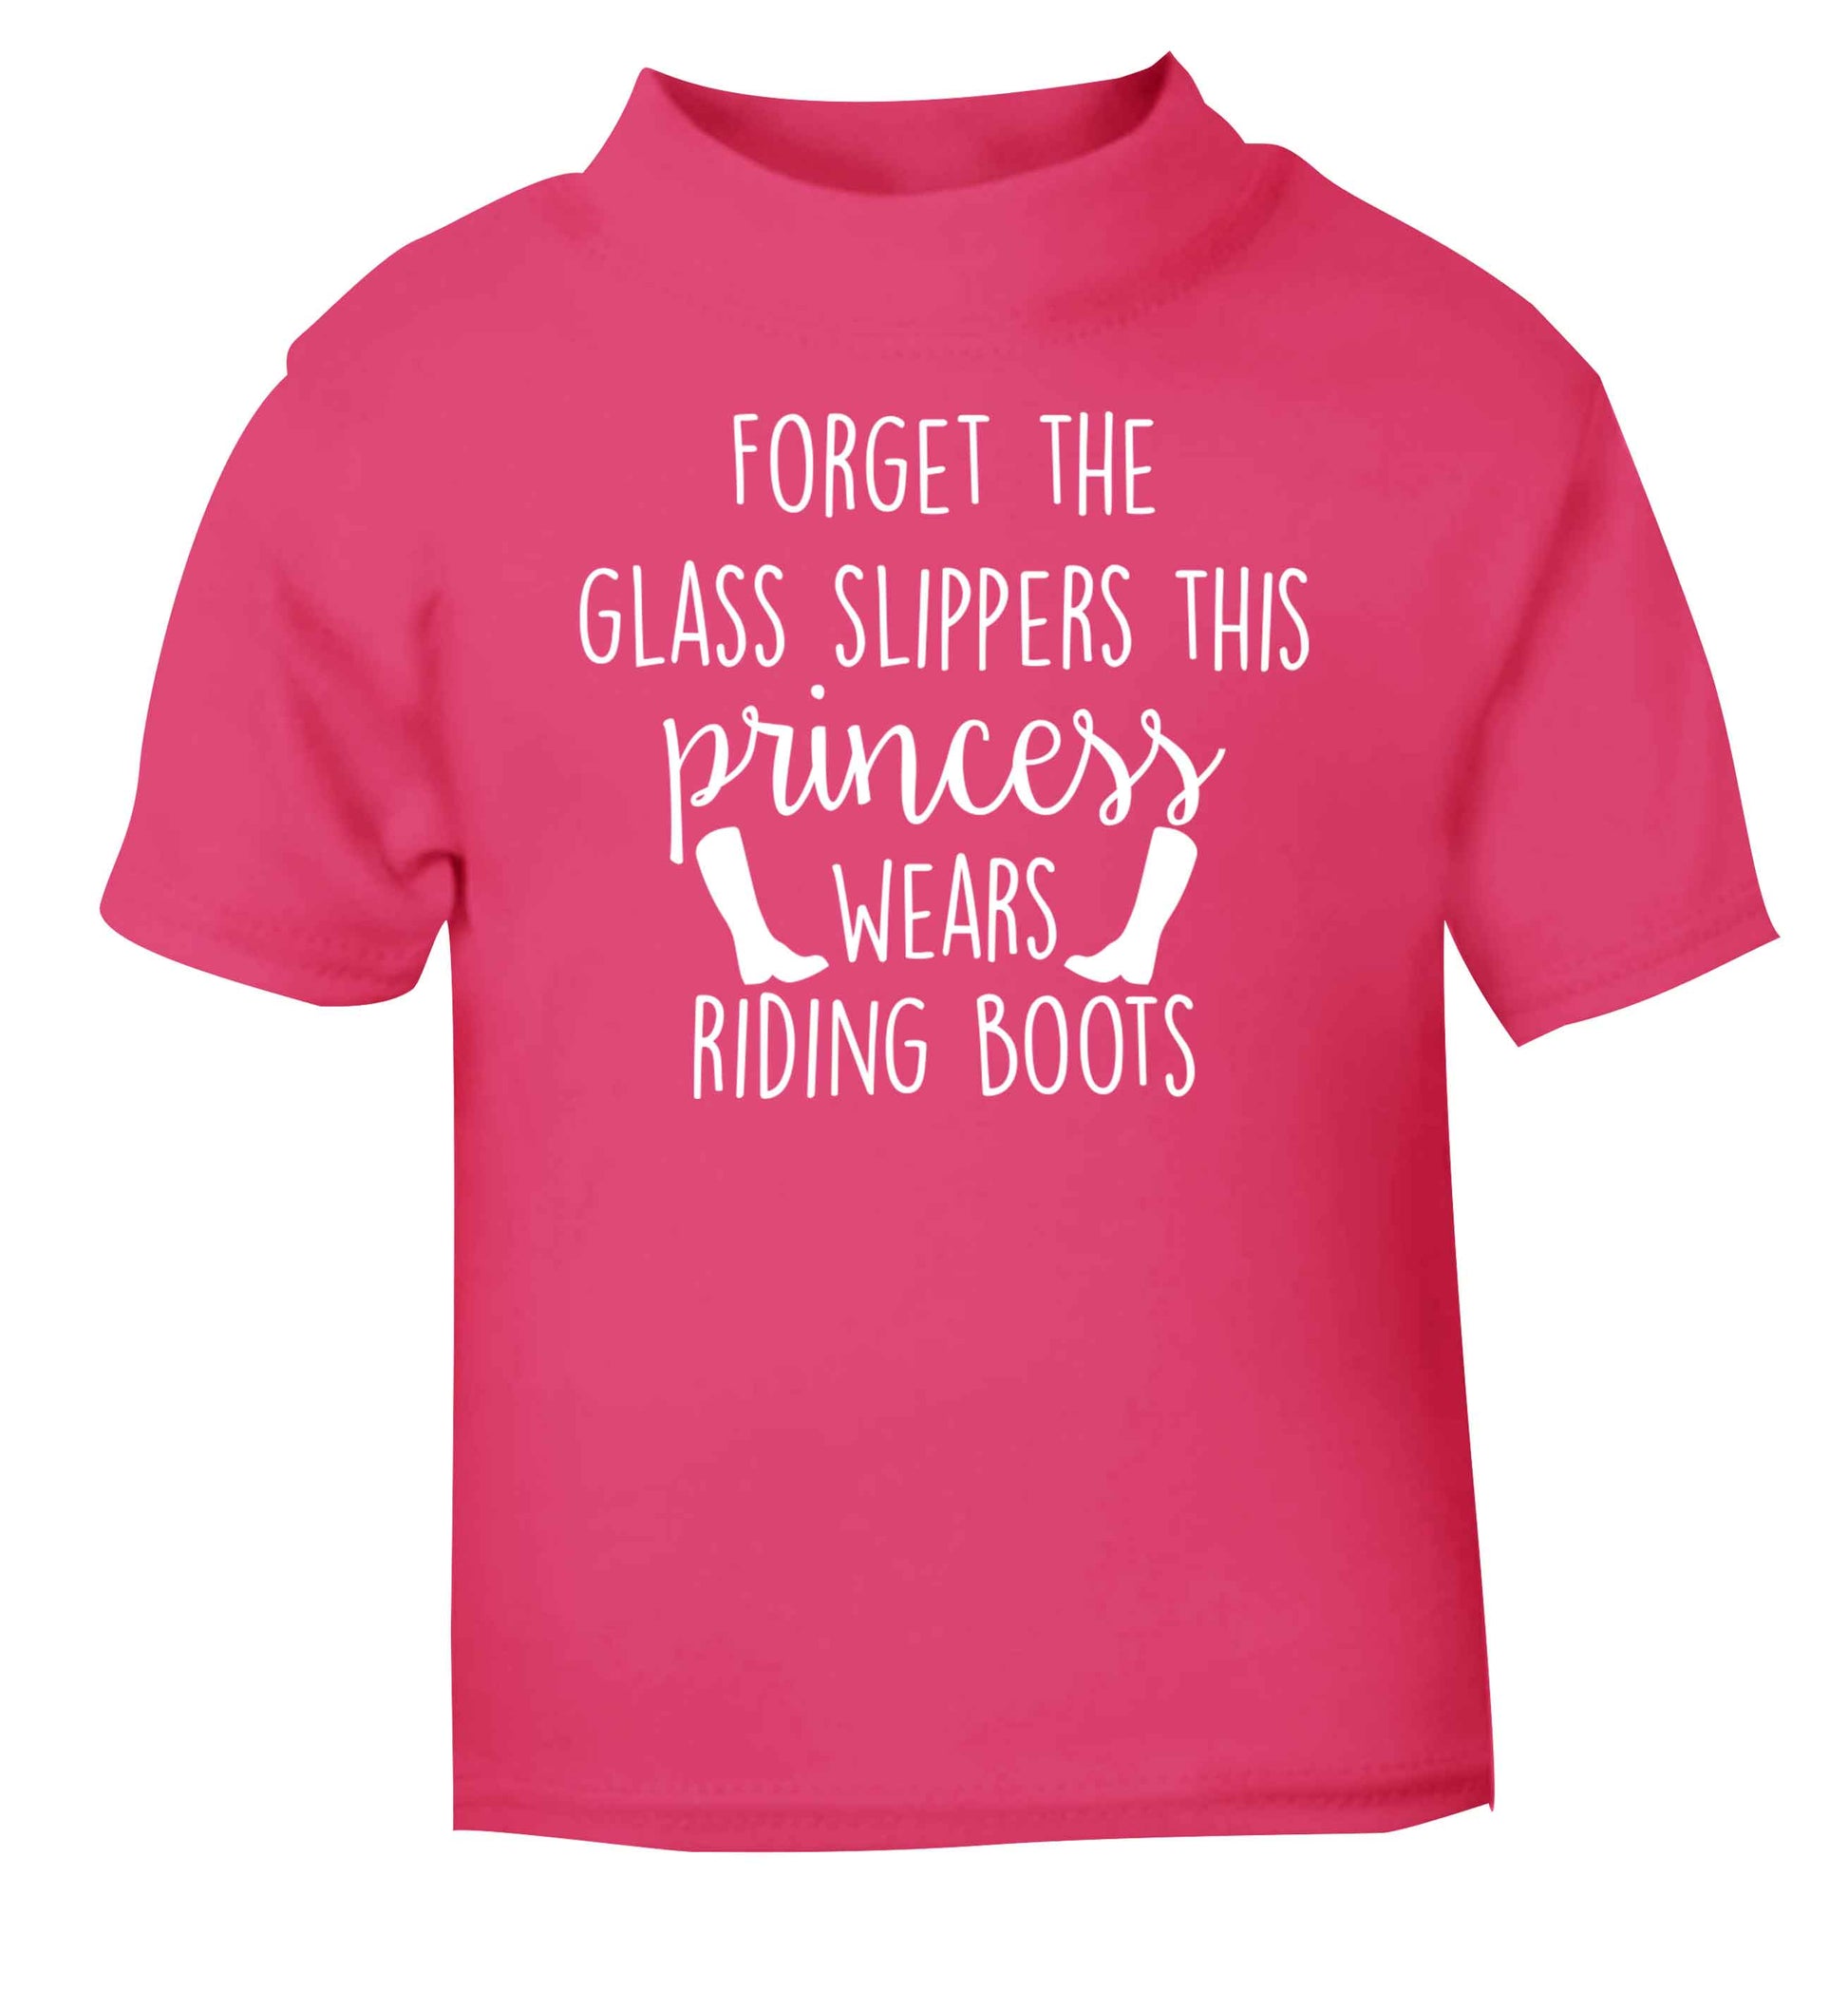 Forget the glass slippers this princess wears riding boots pink baby toddler Tshirt 2 Years